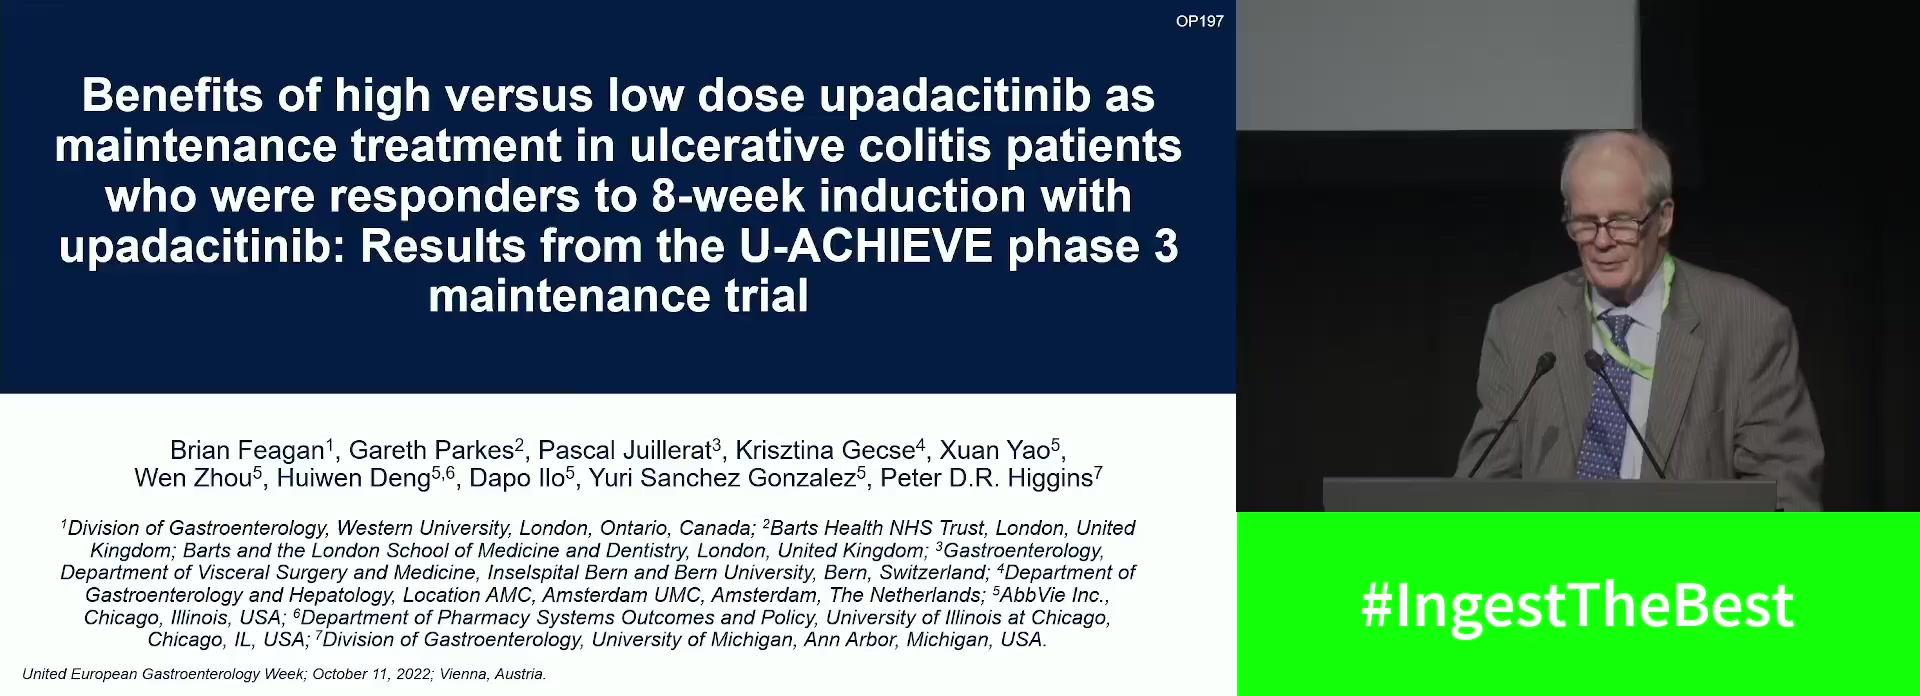 BENEFITS OF HIGH VERSUS LOW DOSE UPADACITINIB AS MAINTENANCE TREATMENT IN ULCERATIVE COLITIS PATIENTS WHO WERE RESPONDERS TO 8-WEEK INDUCTION WITH UPADACITINIB: RESULTS FROM THE U-ACHIEVE PHASE 3 MAINTENANCE TRIAL